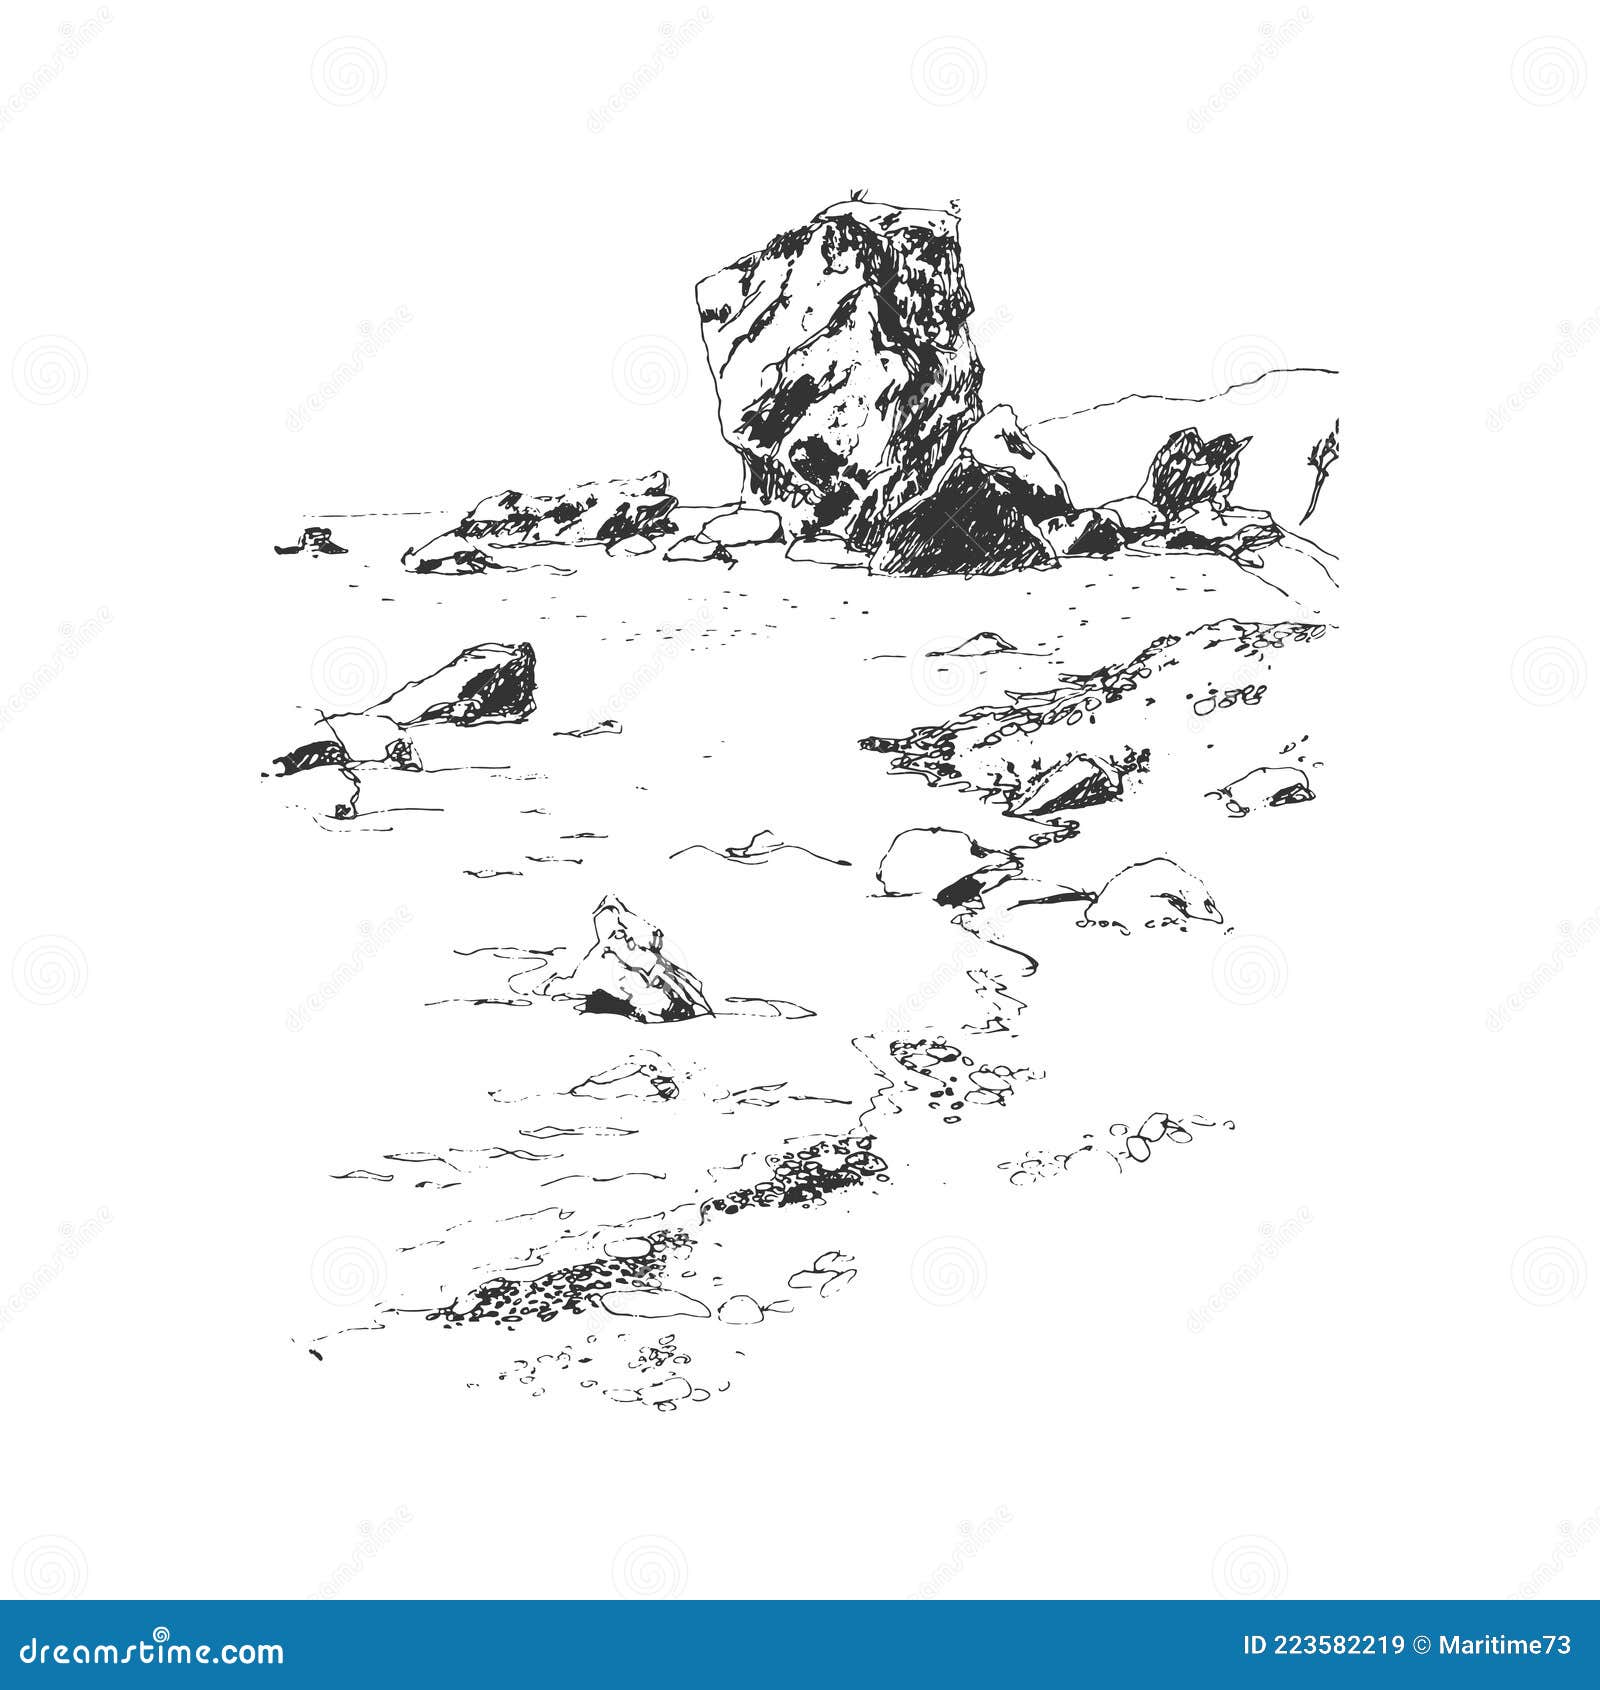 Cliff Drawing - How To Draw A Cliff Step By Step